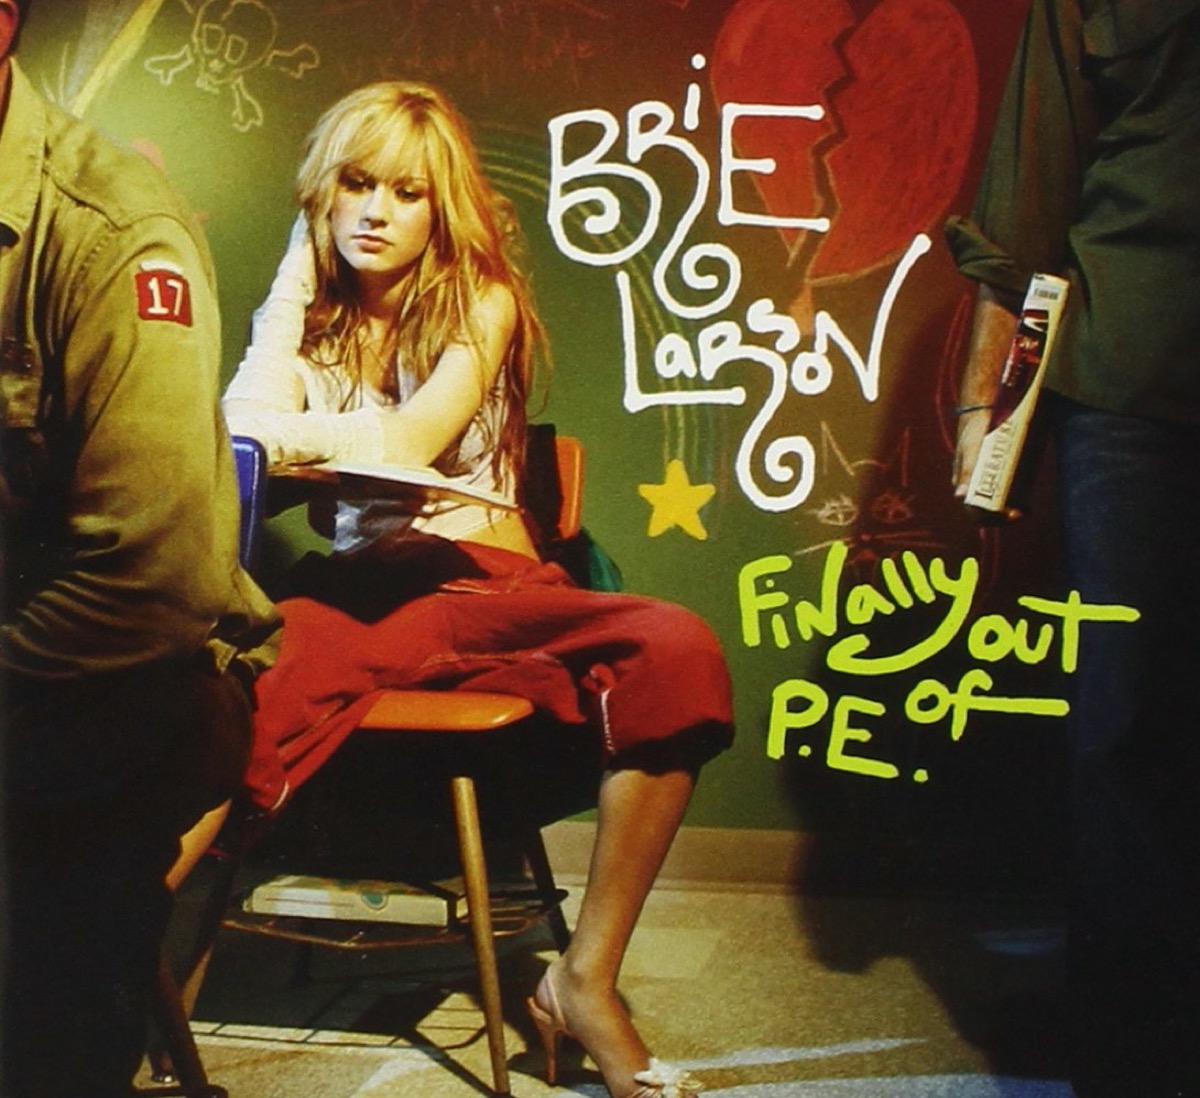 Brie Larson Finally Out of PE album cover